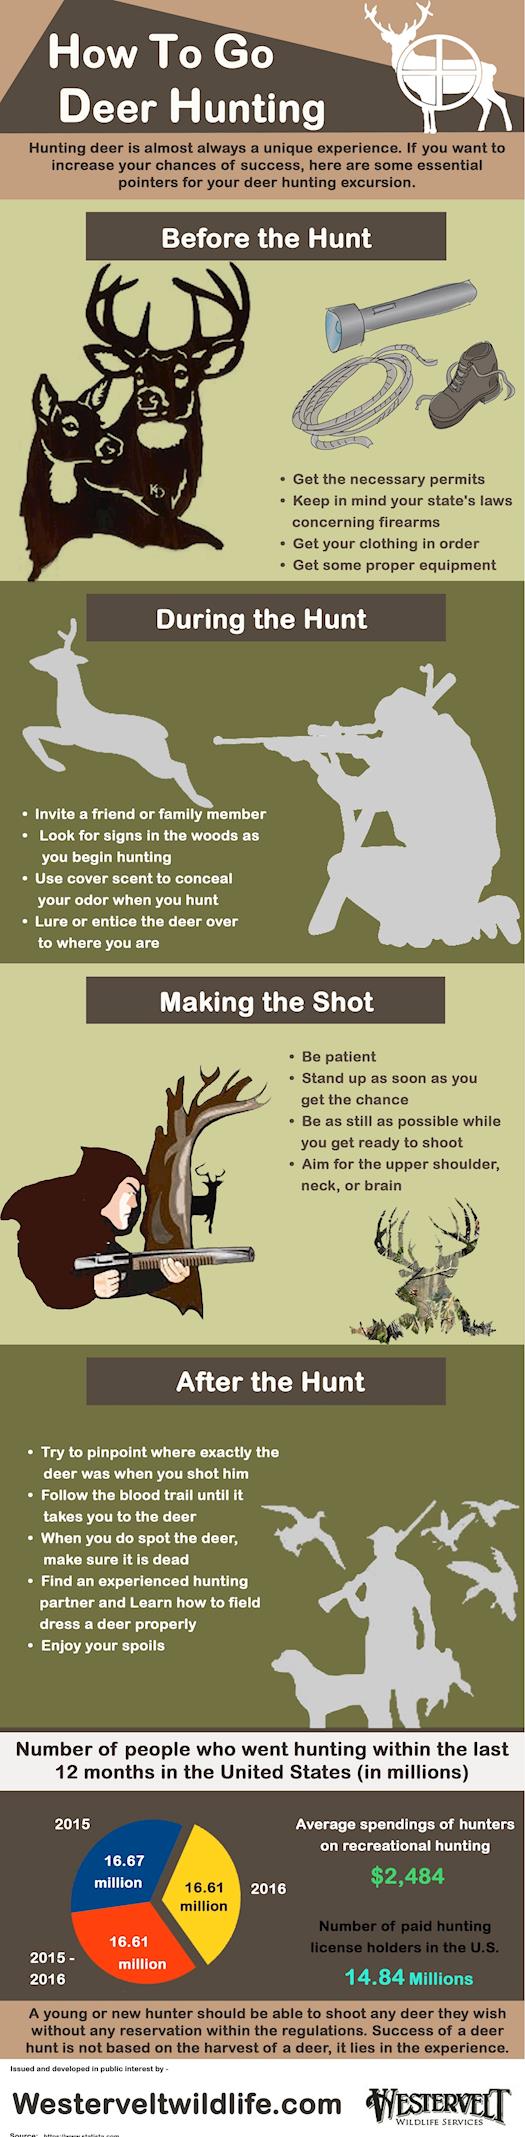 How to go Deer Hunting